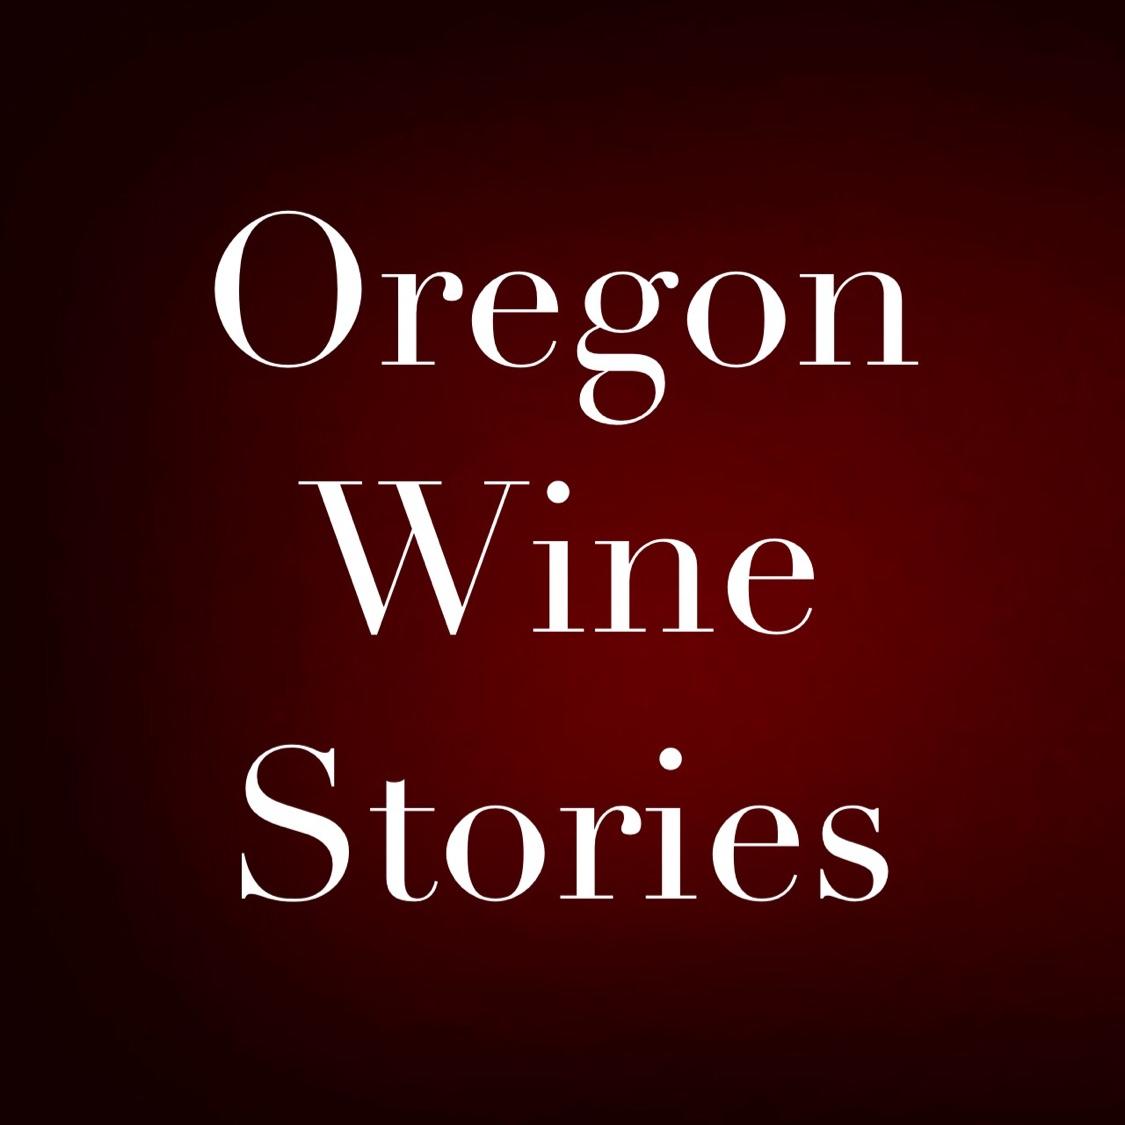 Oregon Wine Stories Coming Spring 2017 from Portland Food Writer @StevenShomler Author of @PDXFoodCartStor and @PDXBeerStories @PDXCoffeeStor #Wine #Oregon